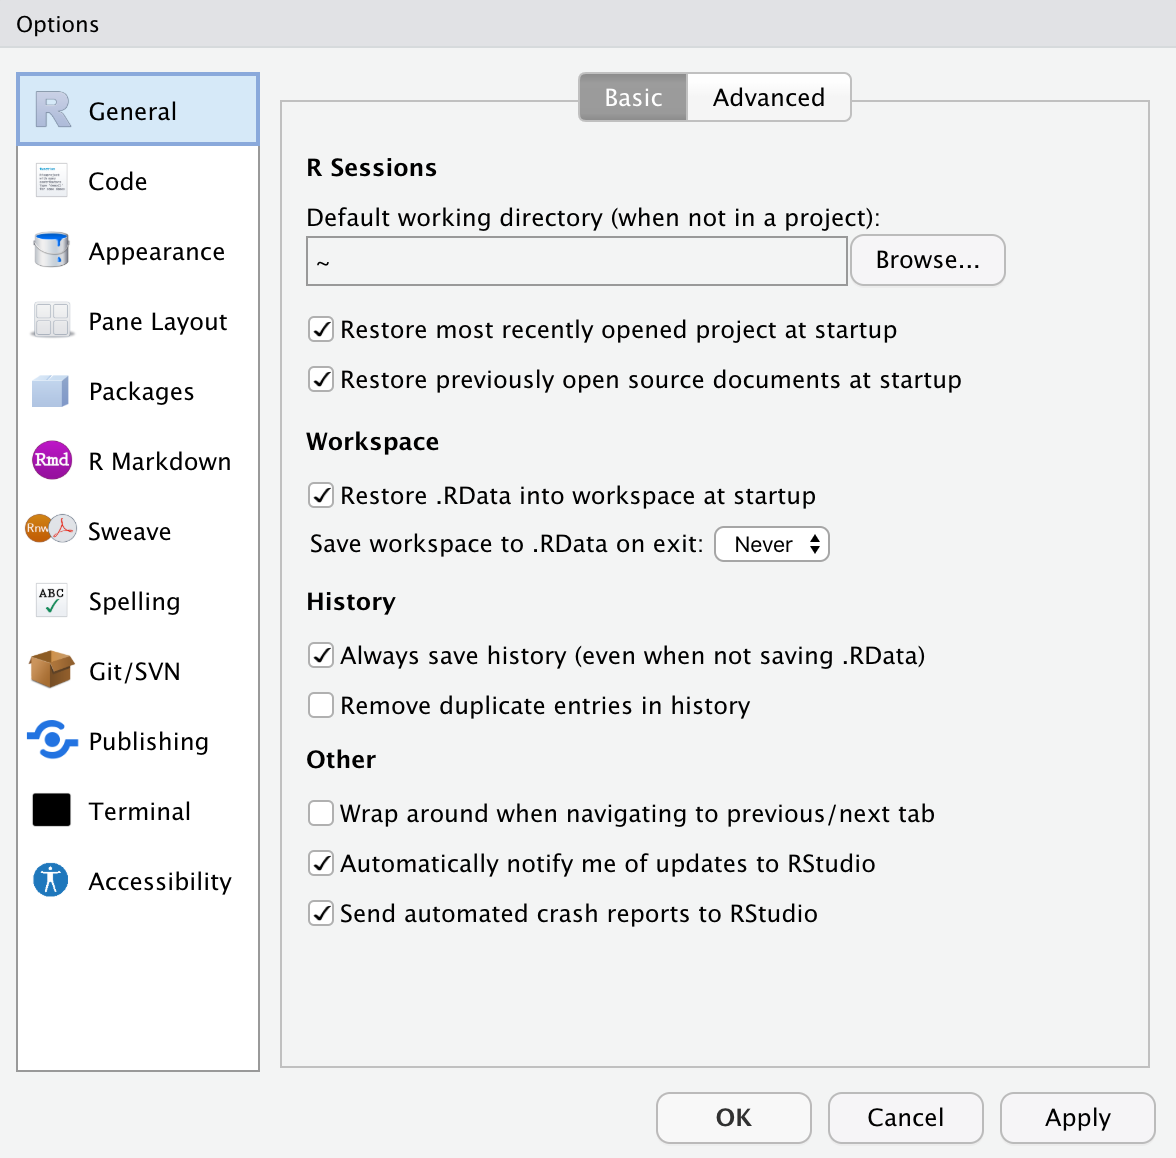 The RStudio options/preferences menu has many settings to customize RStudio.